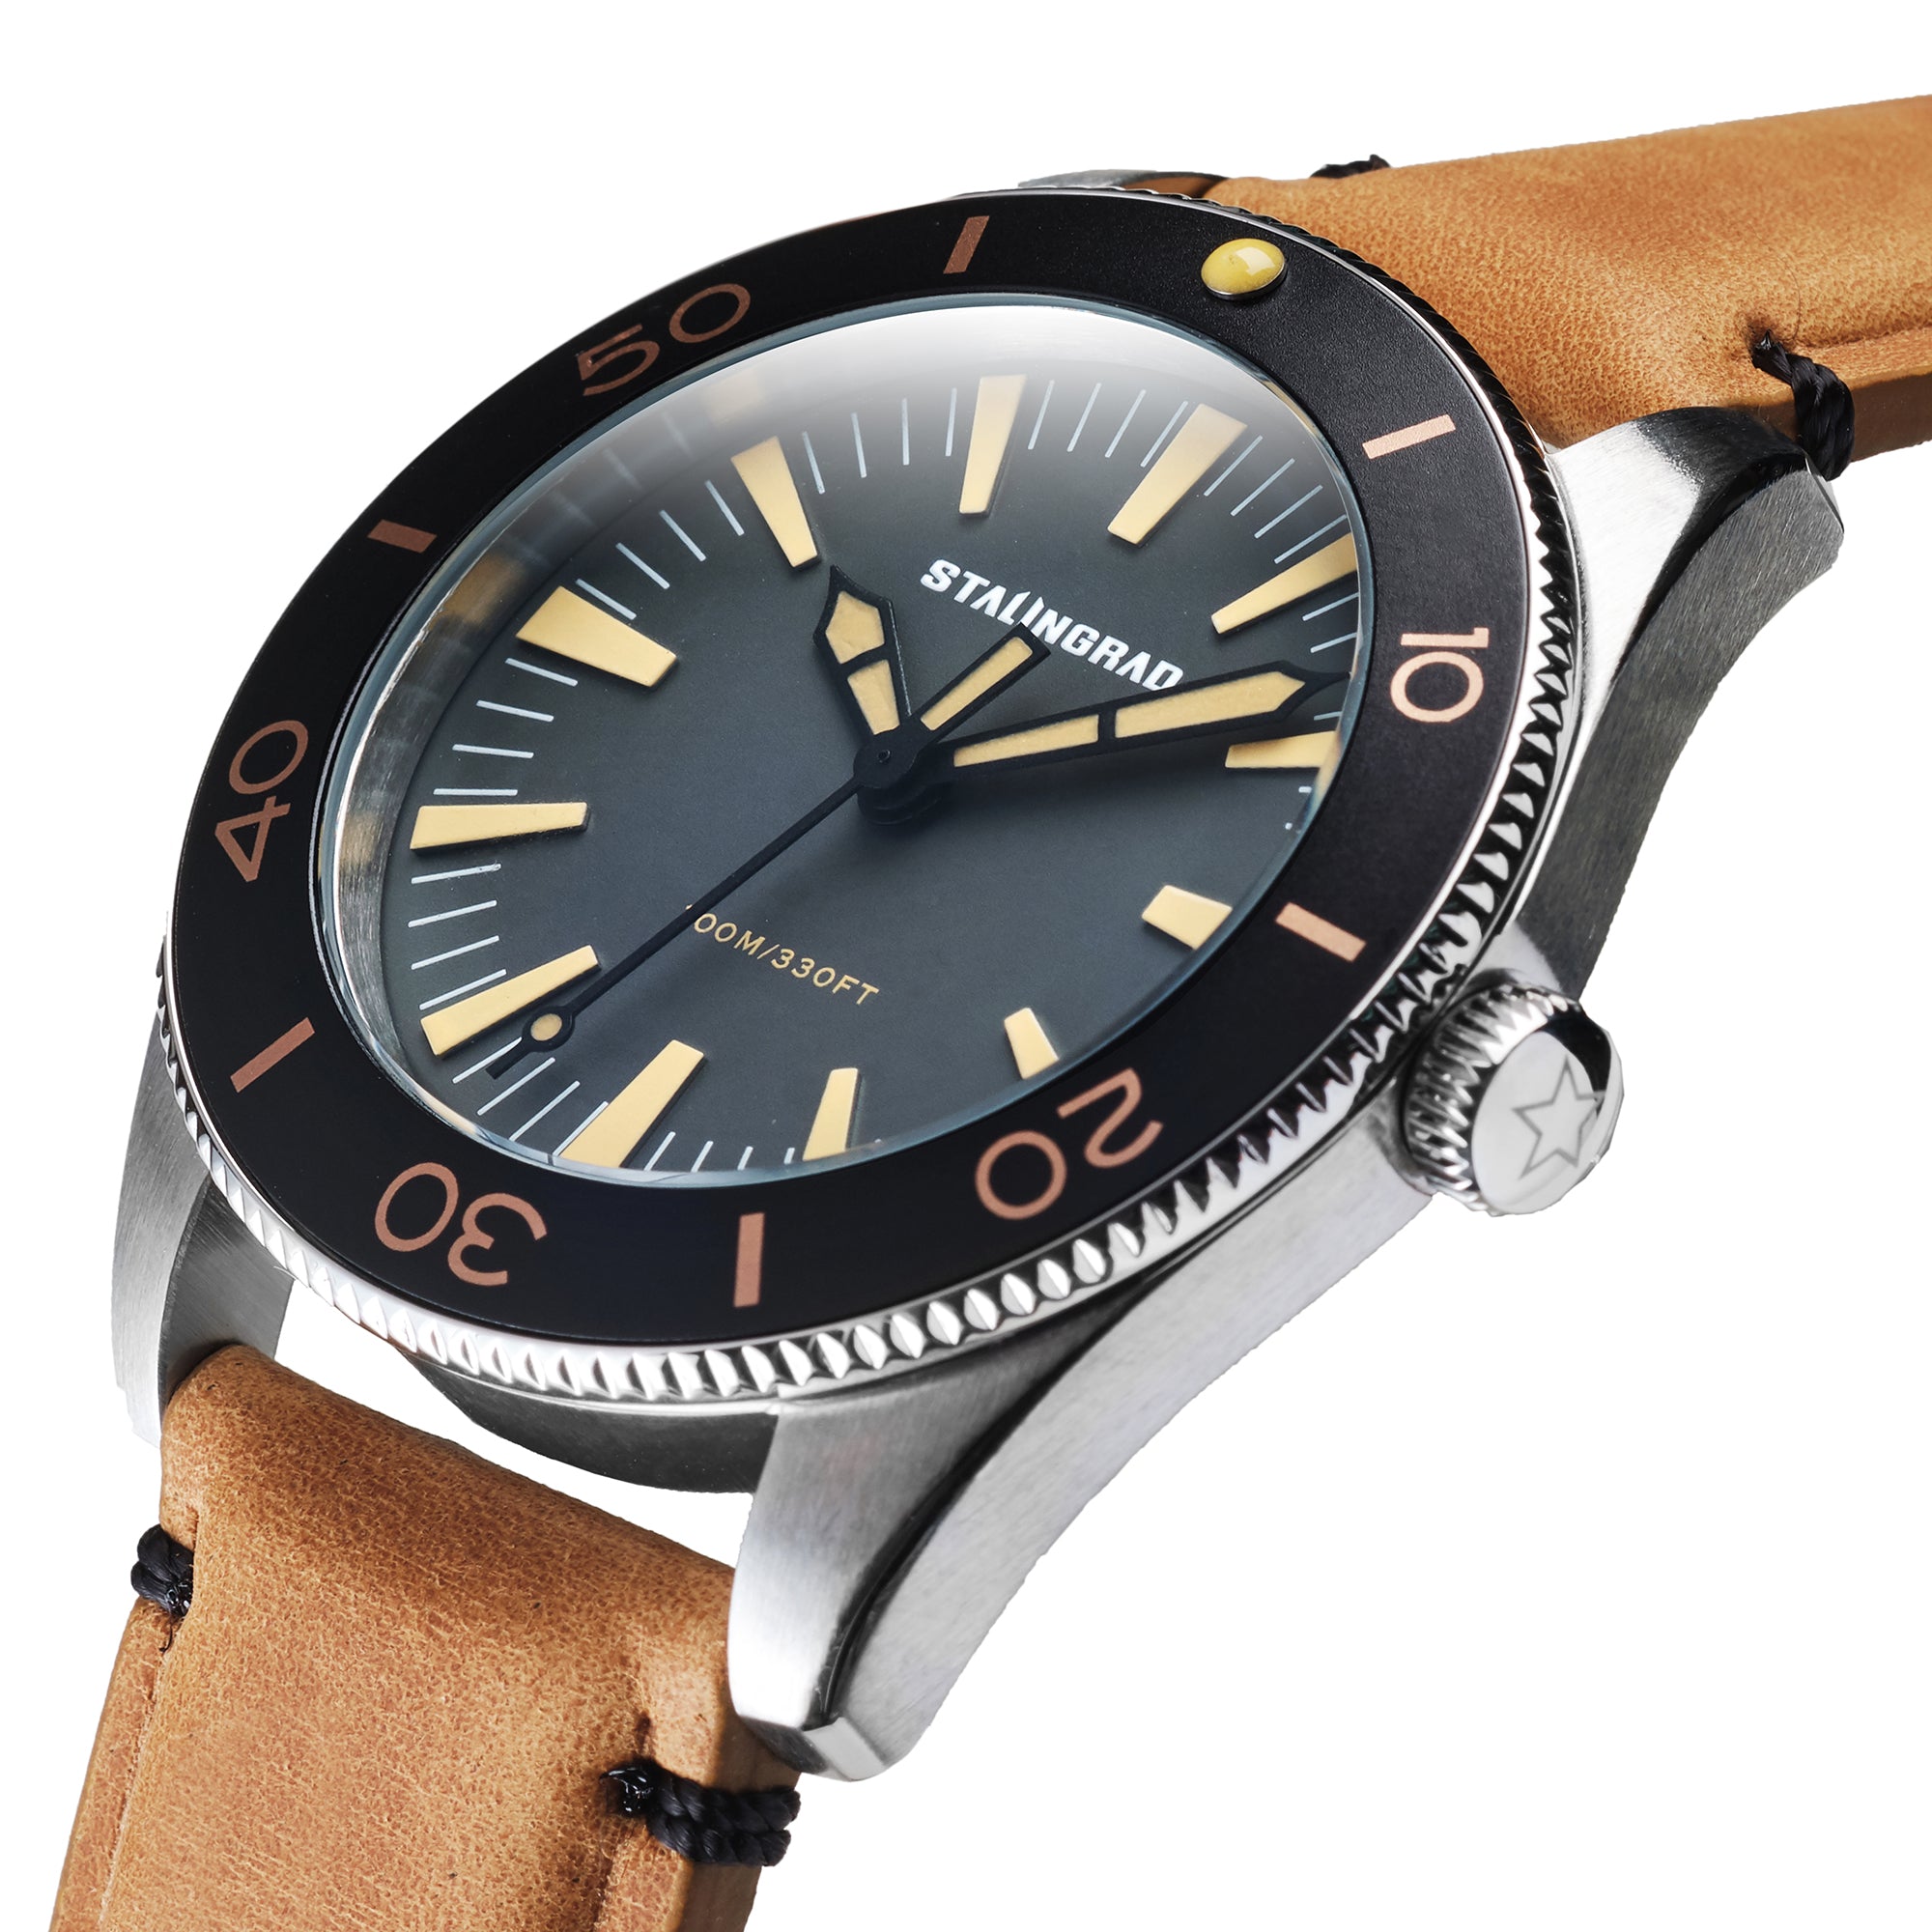 Stalingrad Iron Will Watch Grey Dial, with Black Bezel and a tan leather strap on a white background, diagonal view